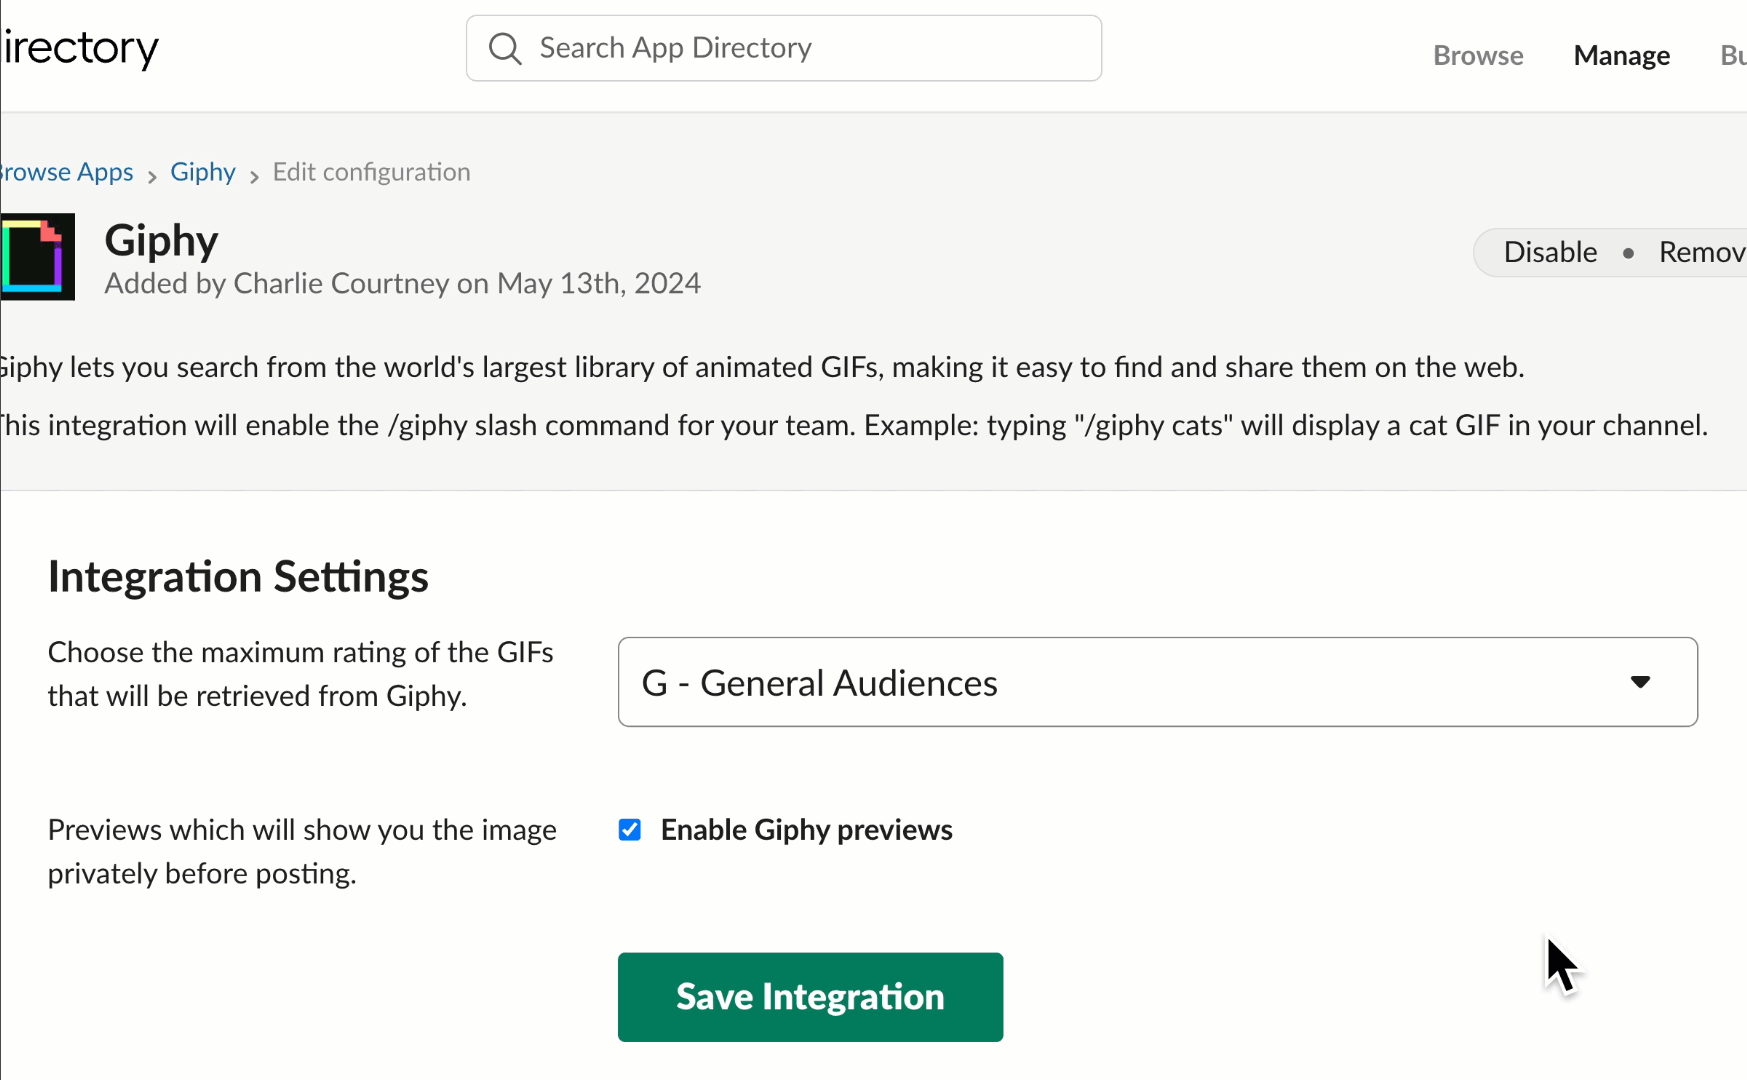 How to manage your Giphy settings in Slack